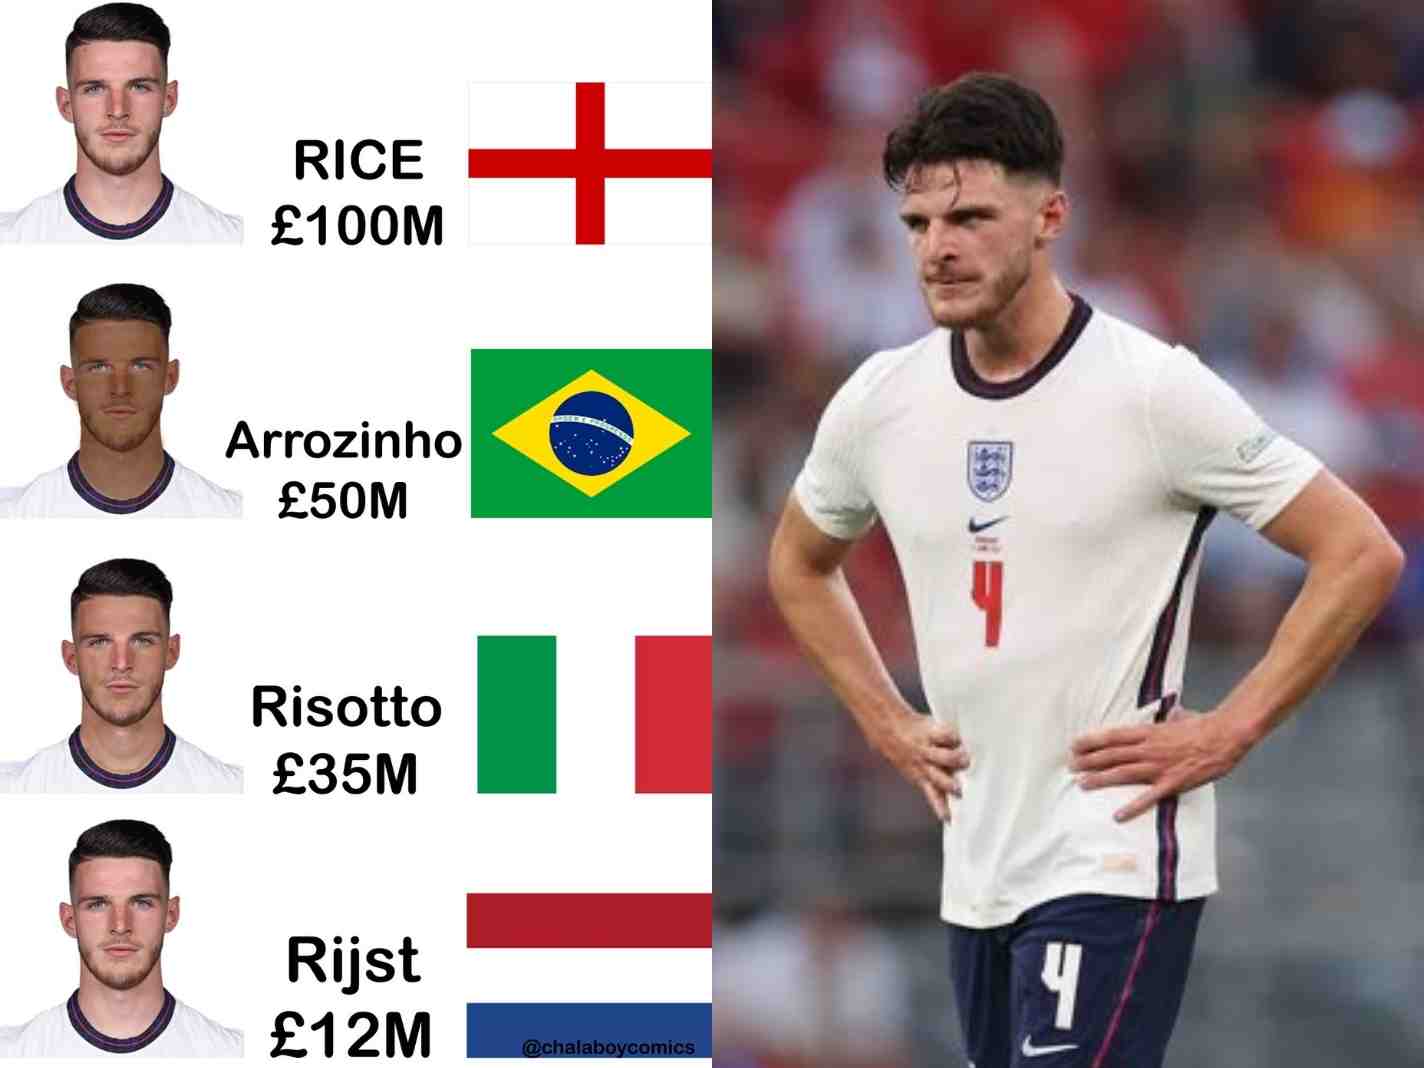 Who are Arrozinho, Risotto and Rijst? New Declan Rice meme explained